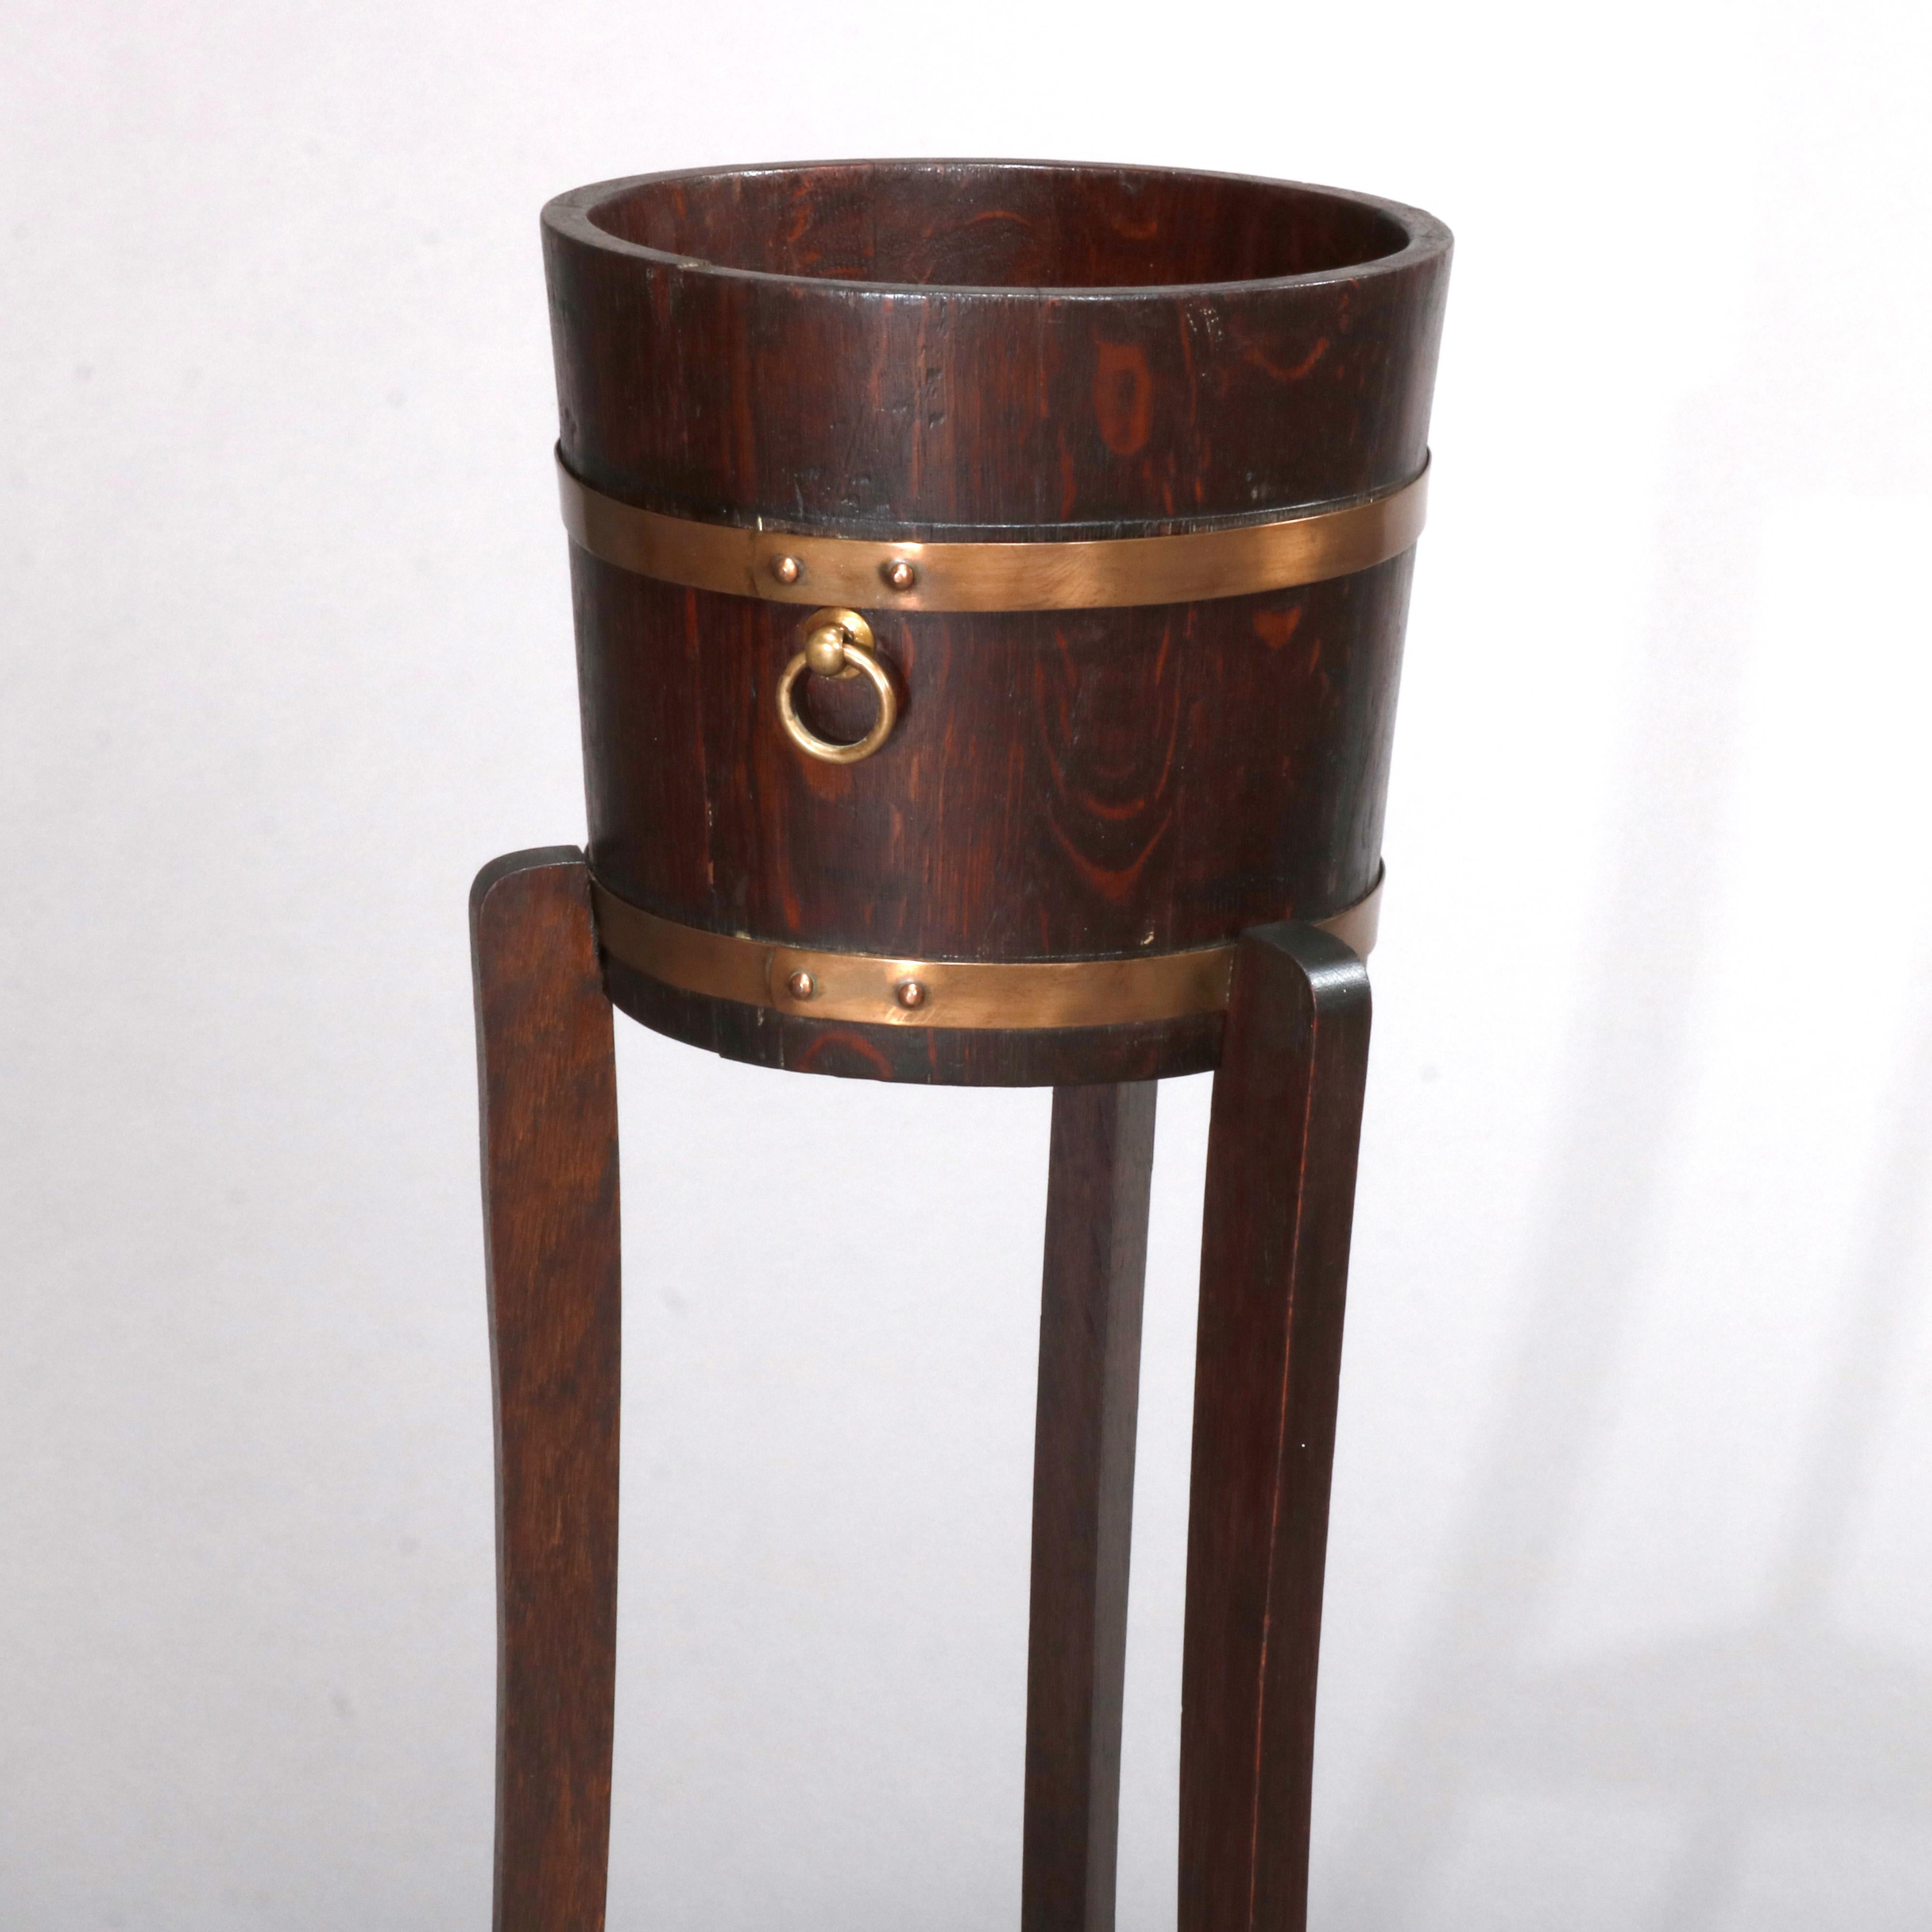 A vintage Arts & Crafts planter with stand in the manner of Stickley offers oak construction with banded bucket form jardinière seated on convex tripod stand having lower triangular shelf, circa 1930

Measures: 35.75